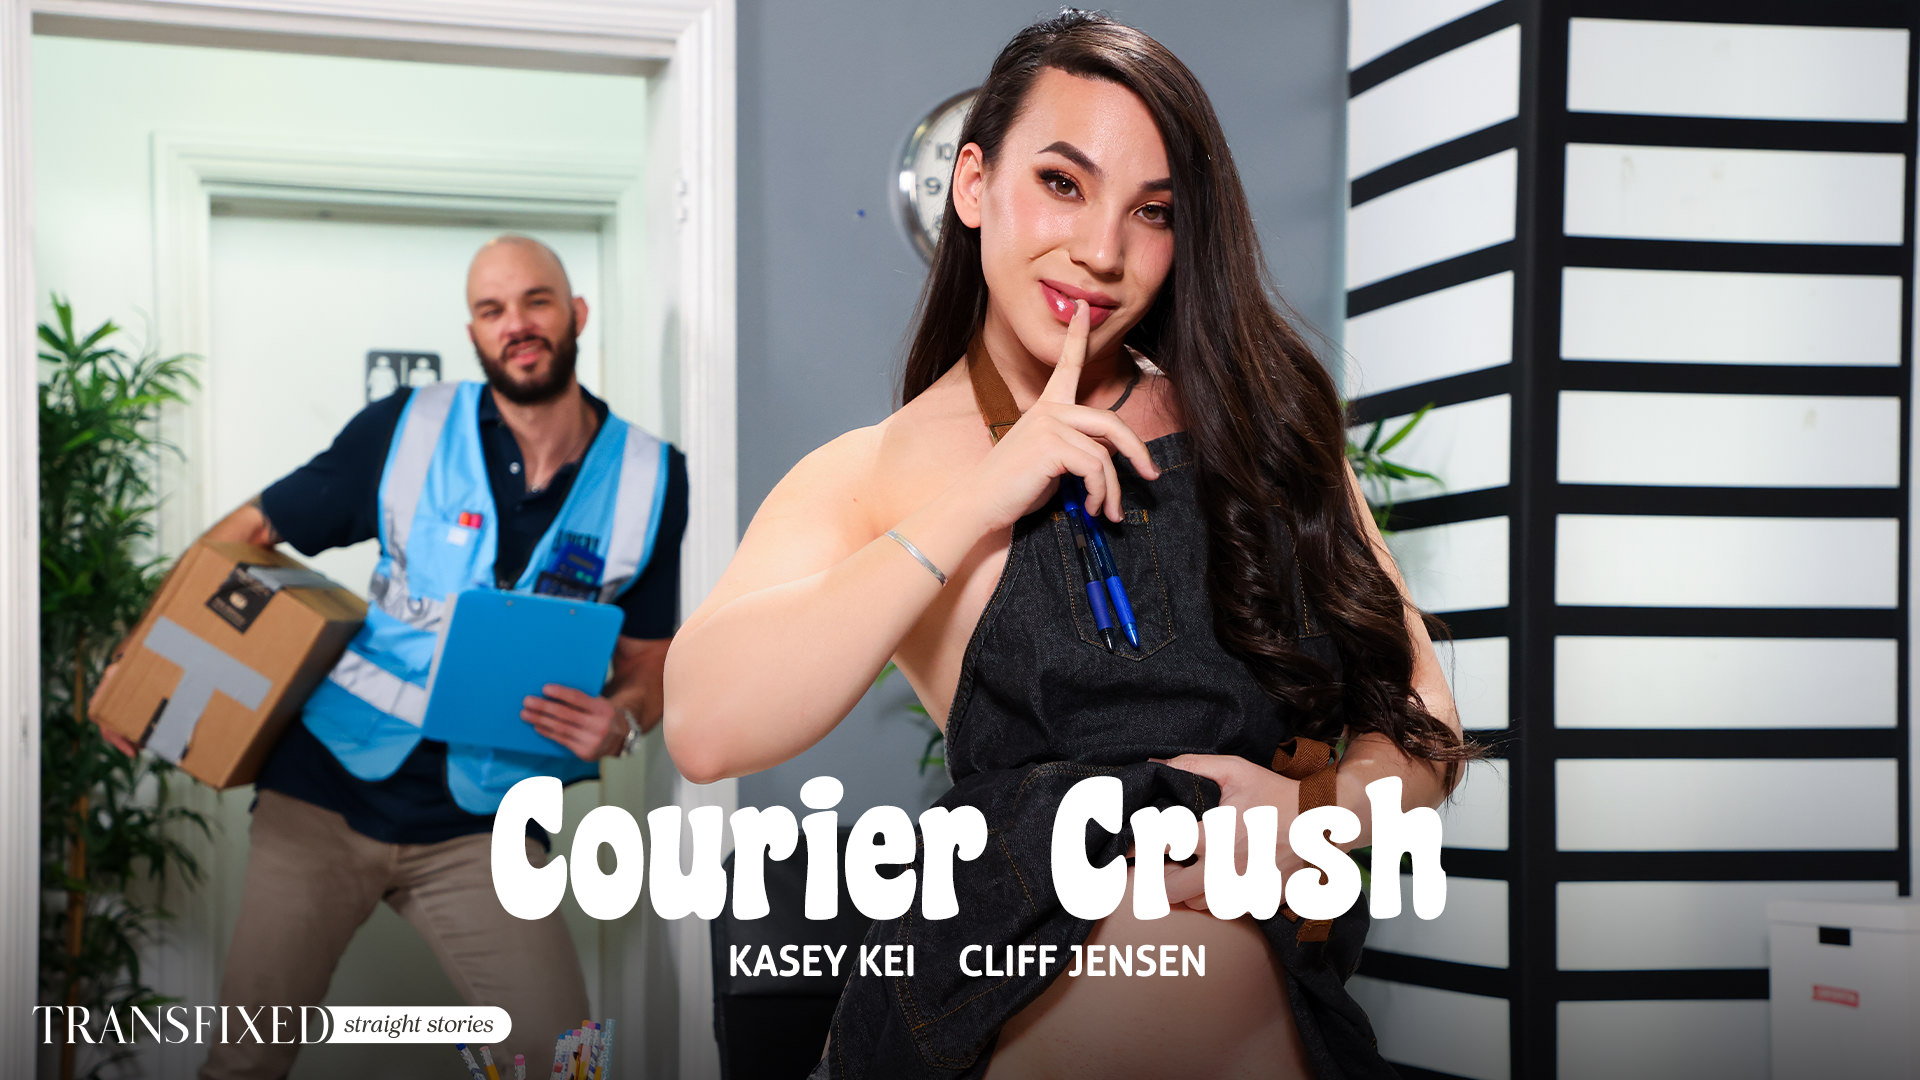 AdultTime Transfixed Cliff Jensen, Kasey Kei – Courier Crush